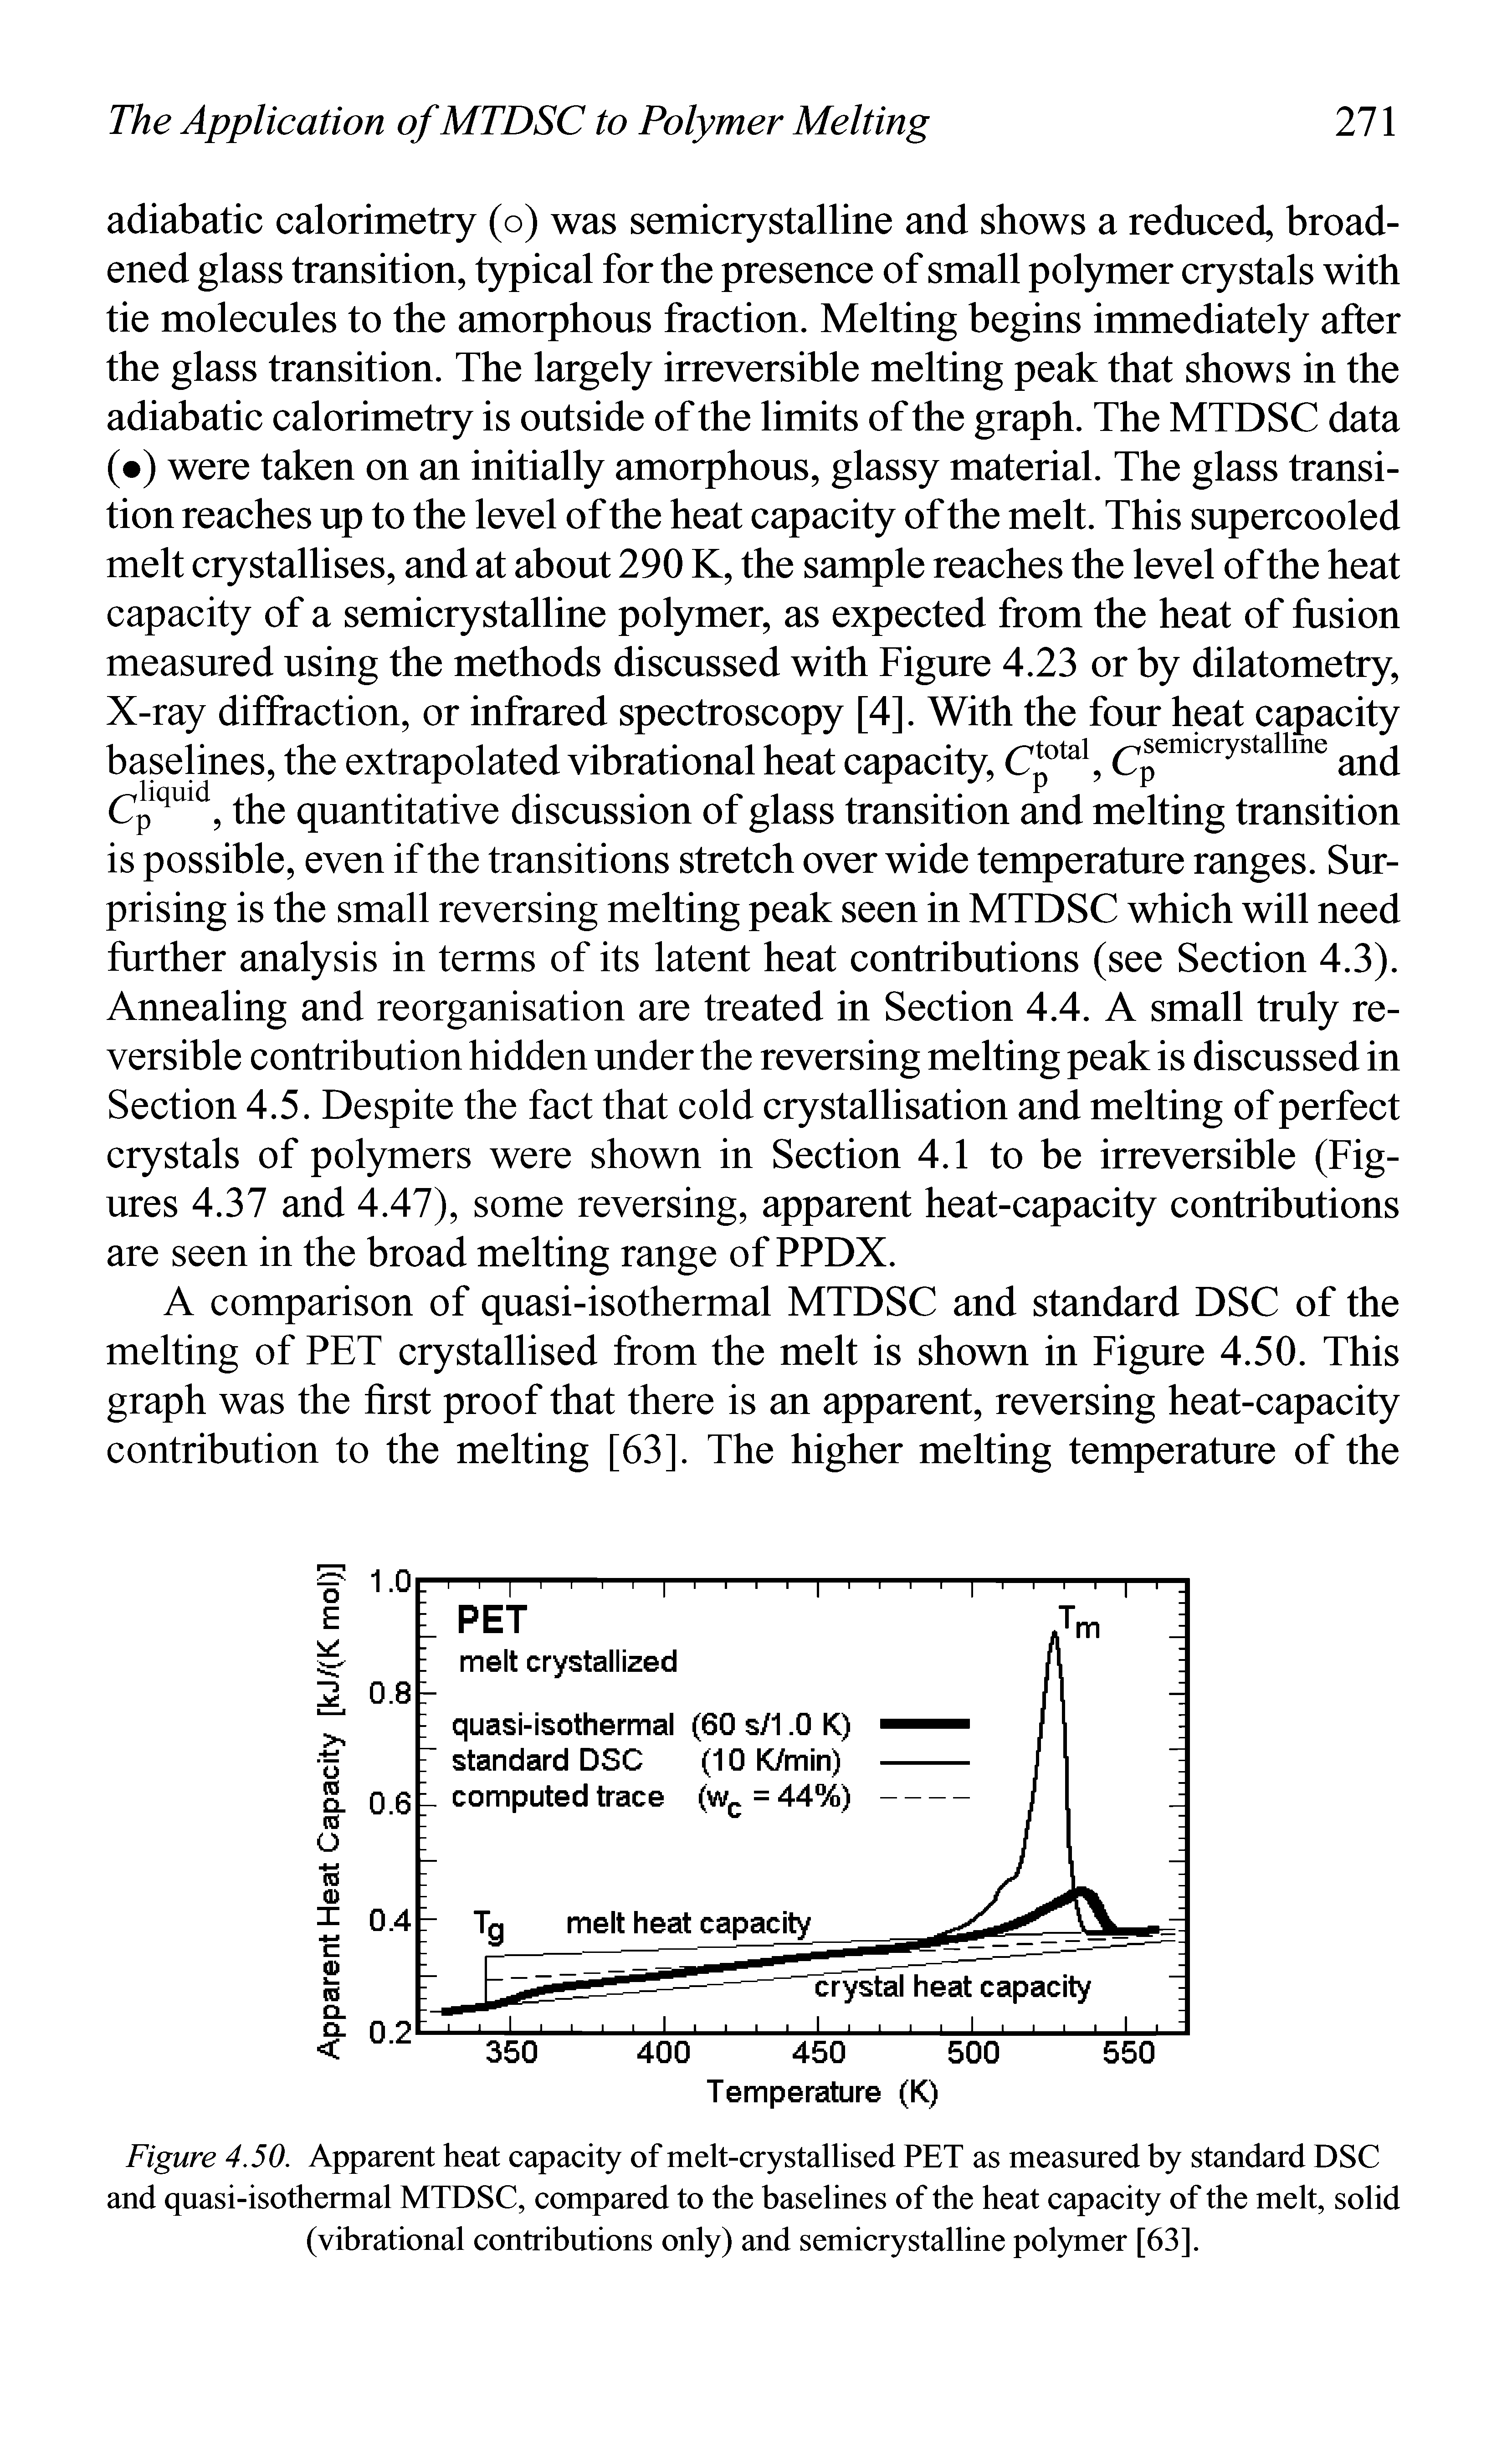 Figure 4.50. Apparent heat capacity of melt-crystallised PET as measured by standard DSC and quasi-isothermal MTDSC, compared to the baselines of the heat capacity of the melt, solid (vibrational contributions only) and semicrystalline pol)mier [63].